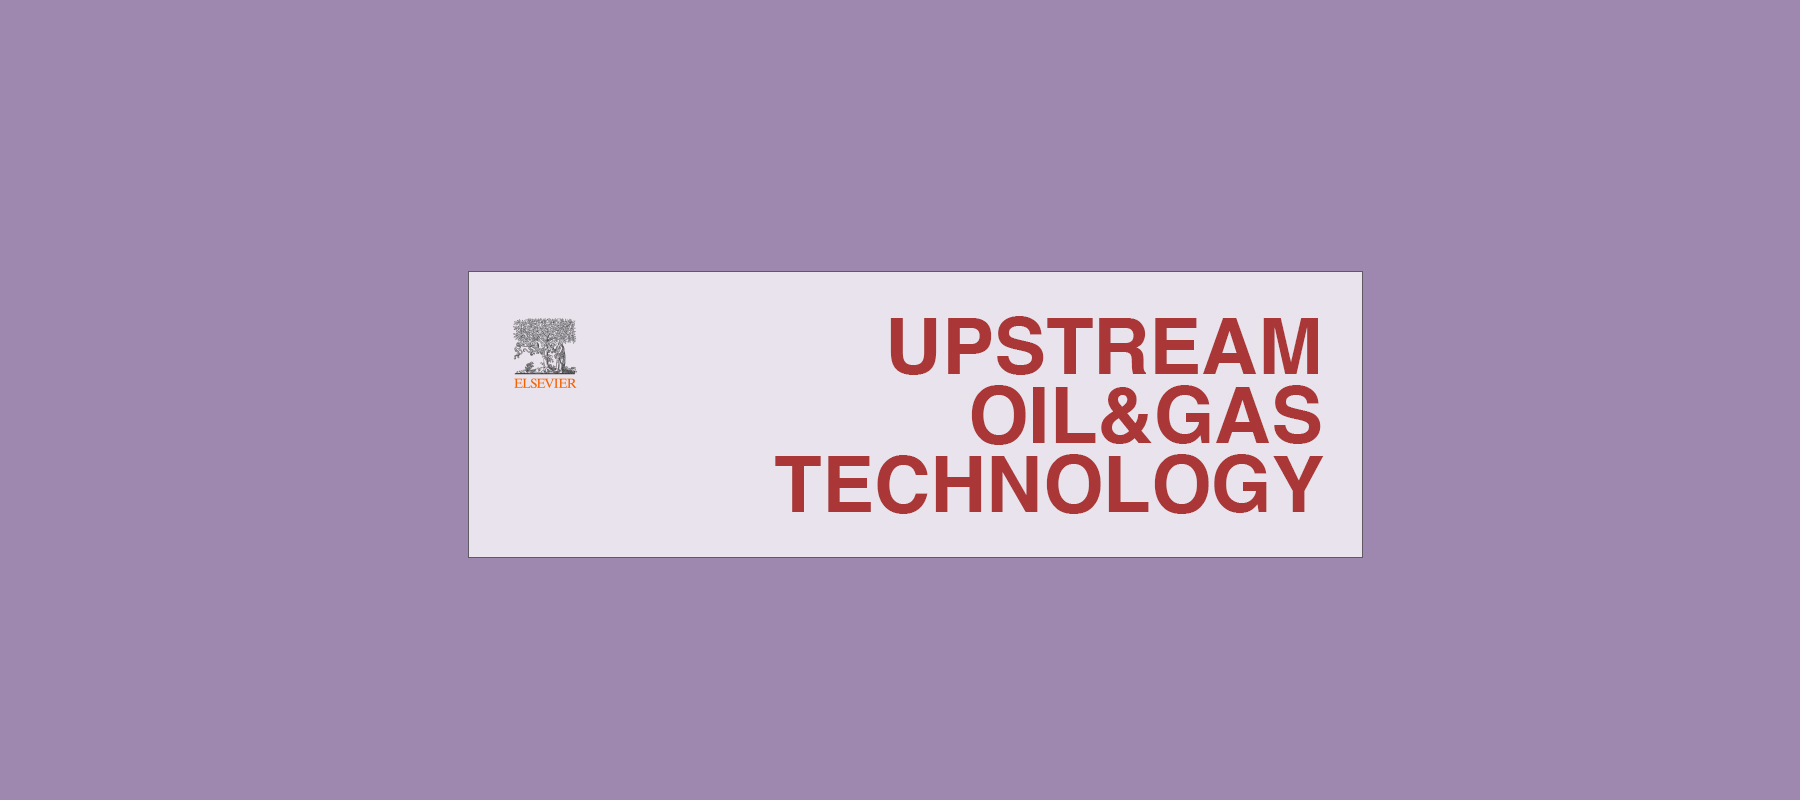 Upstream-oil-and-gas-technology